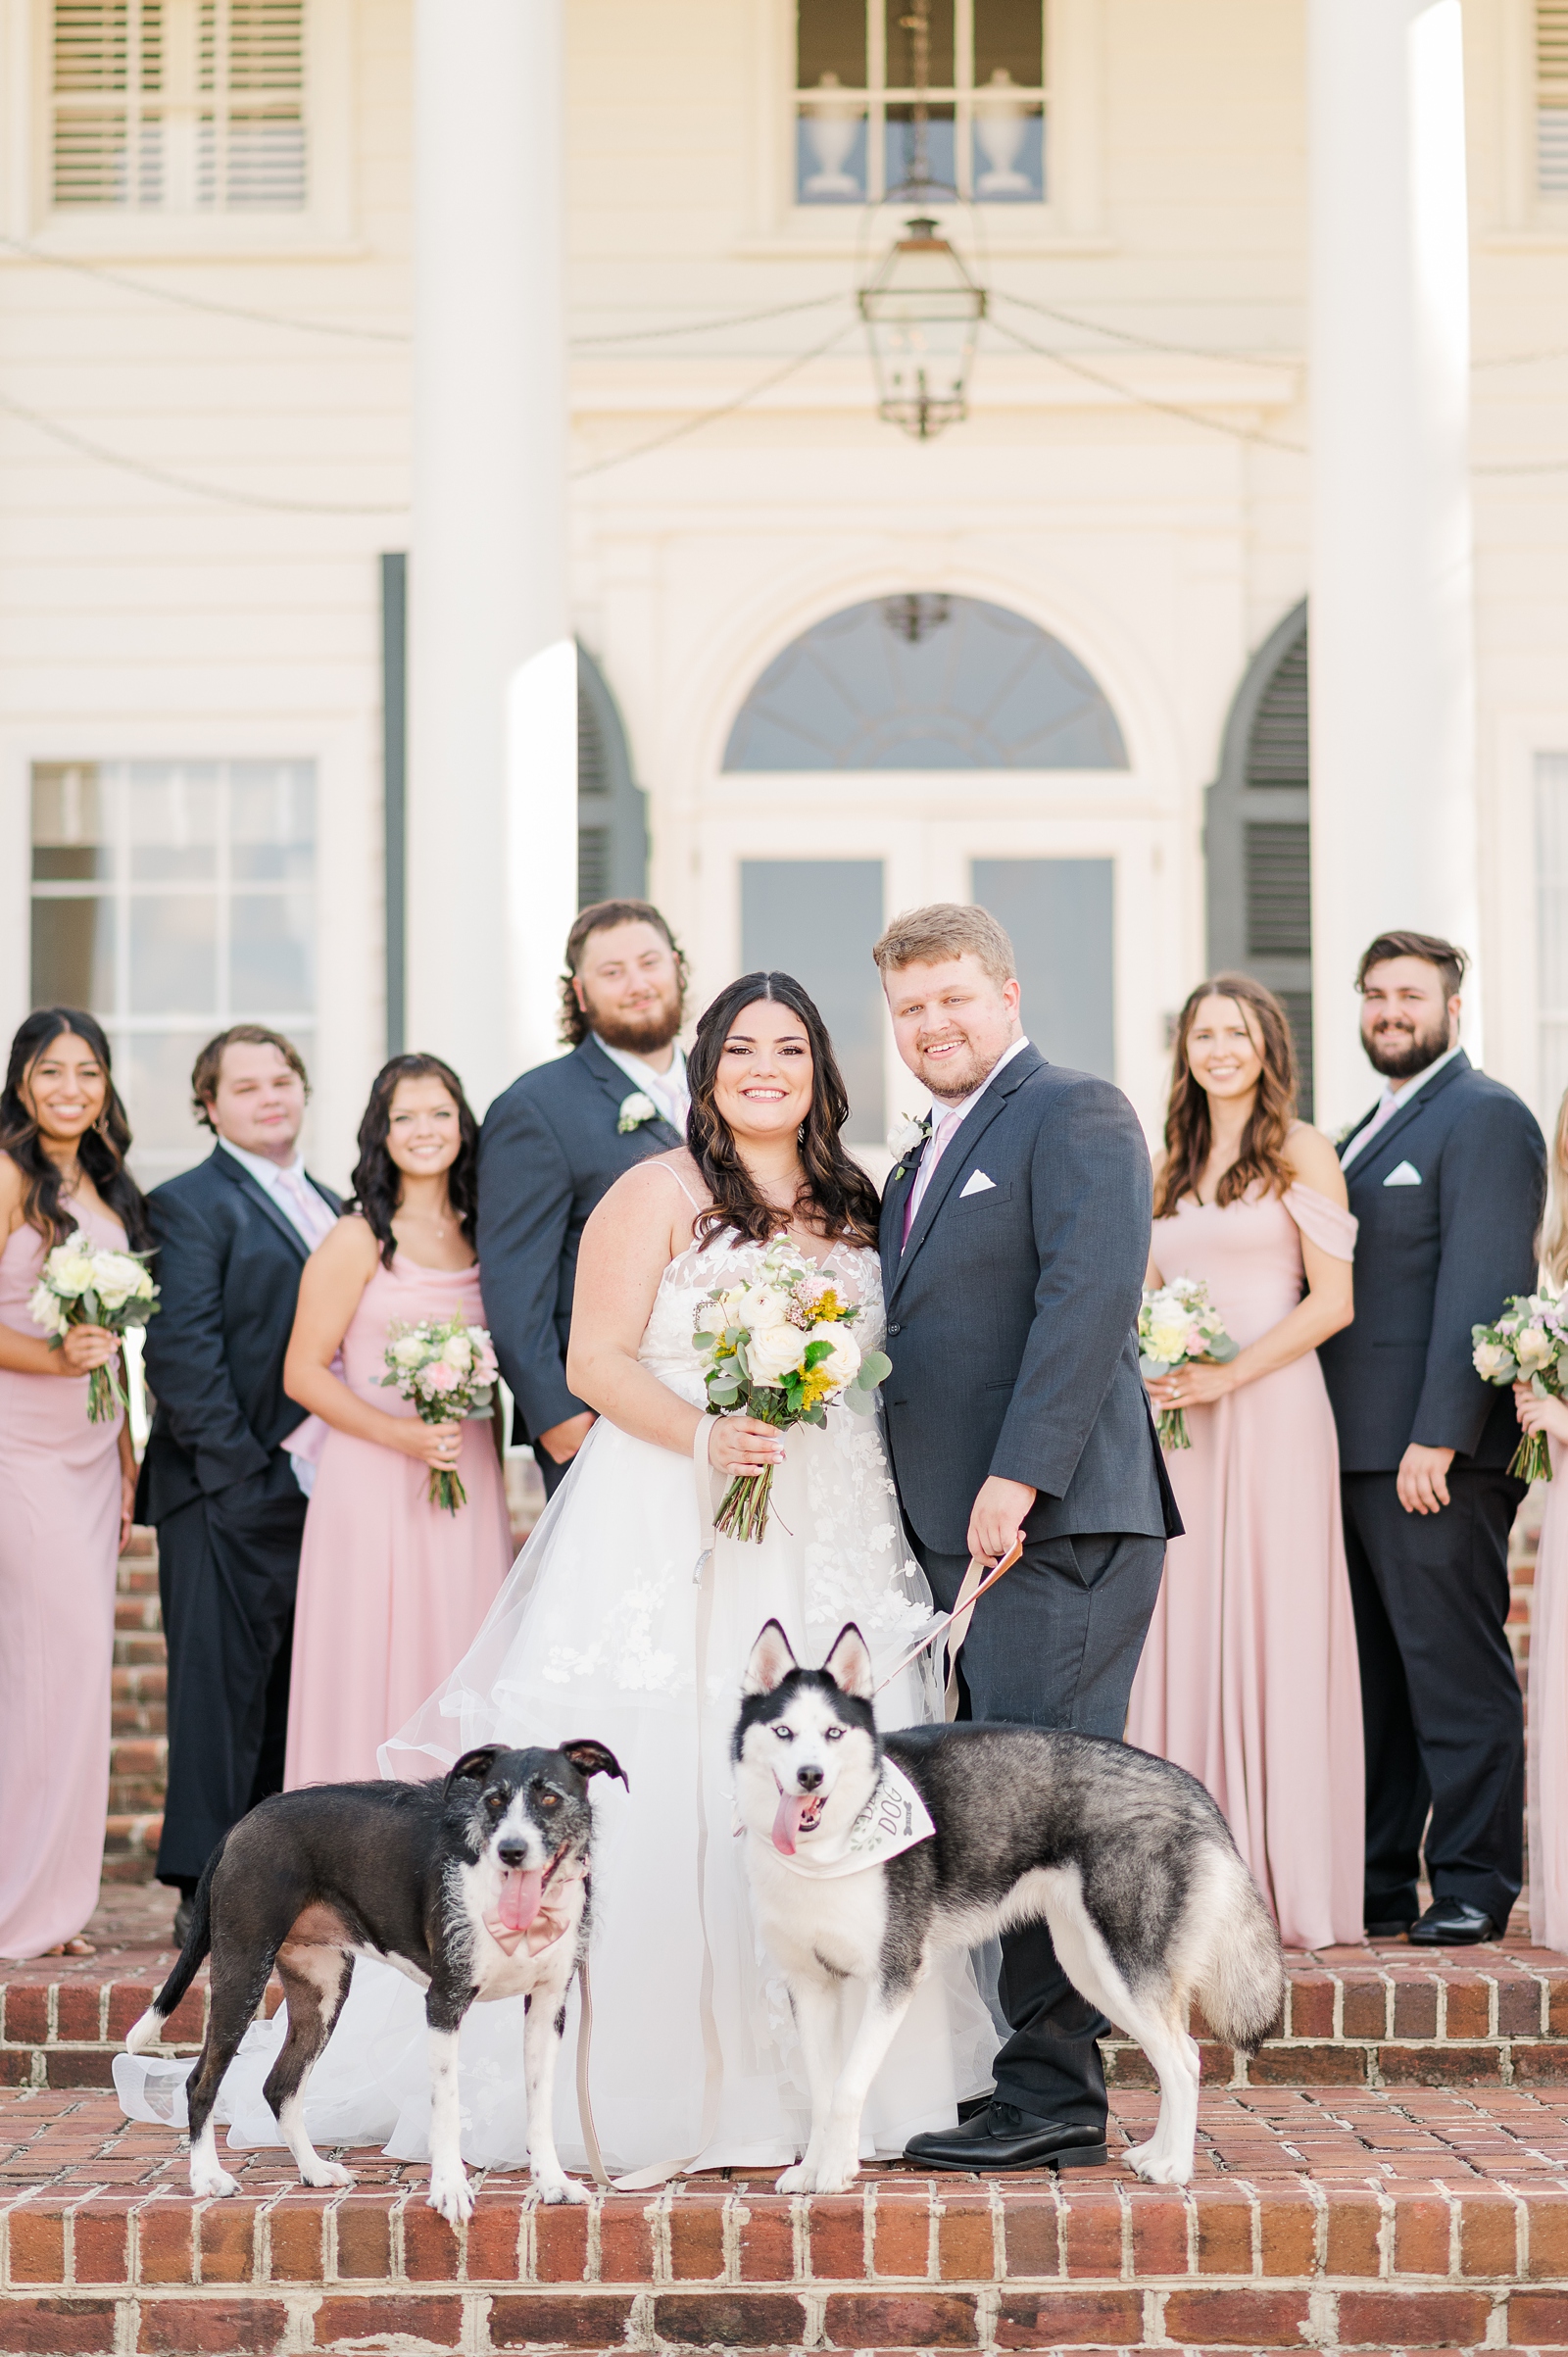 Large Bridal Party Portraits with Dogs at a Cumberland Estate Wedding. Photography by New Kent Wedding Photographer Kailey Brianne Photography. 